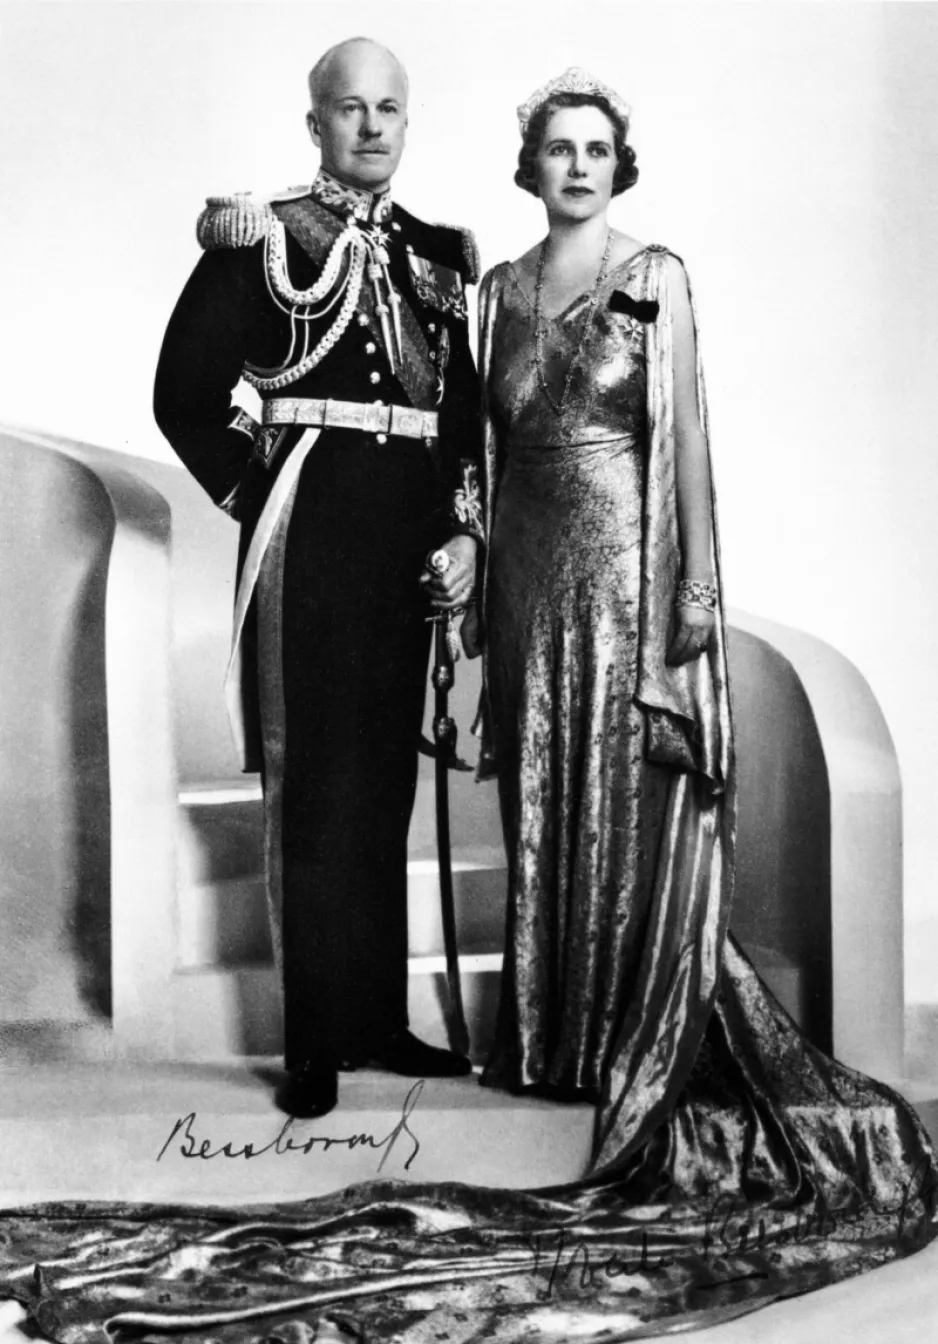 Lord and Lady Bessborough, 1933. The image was published in a double-page spread in the Illustrated London News. 